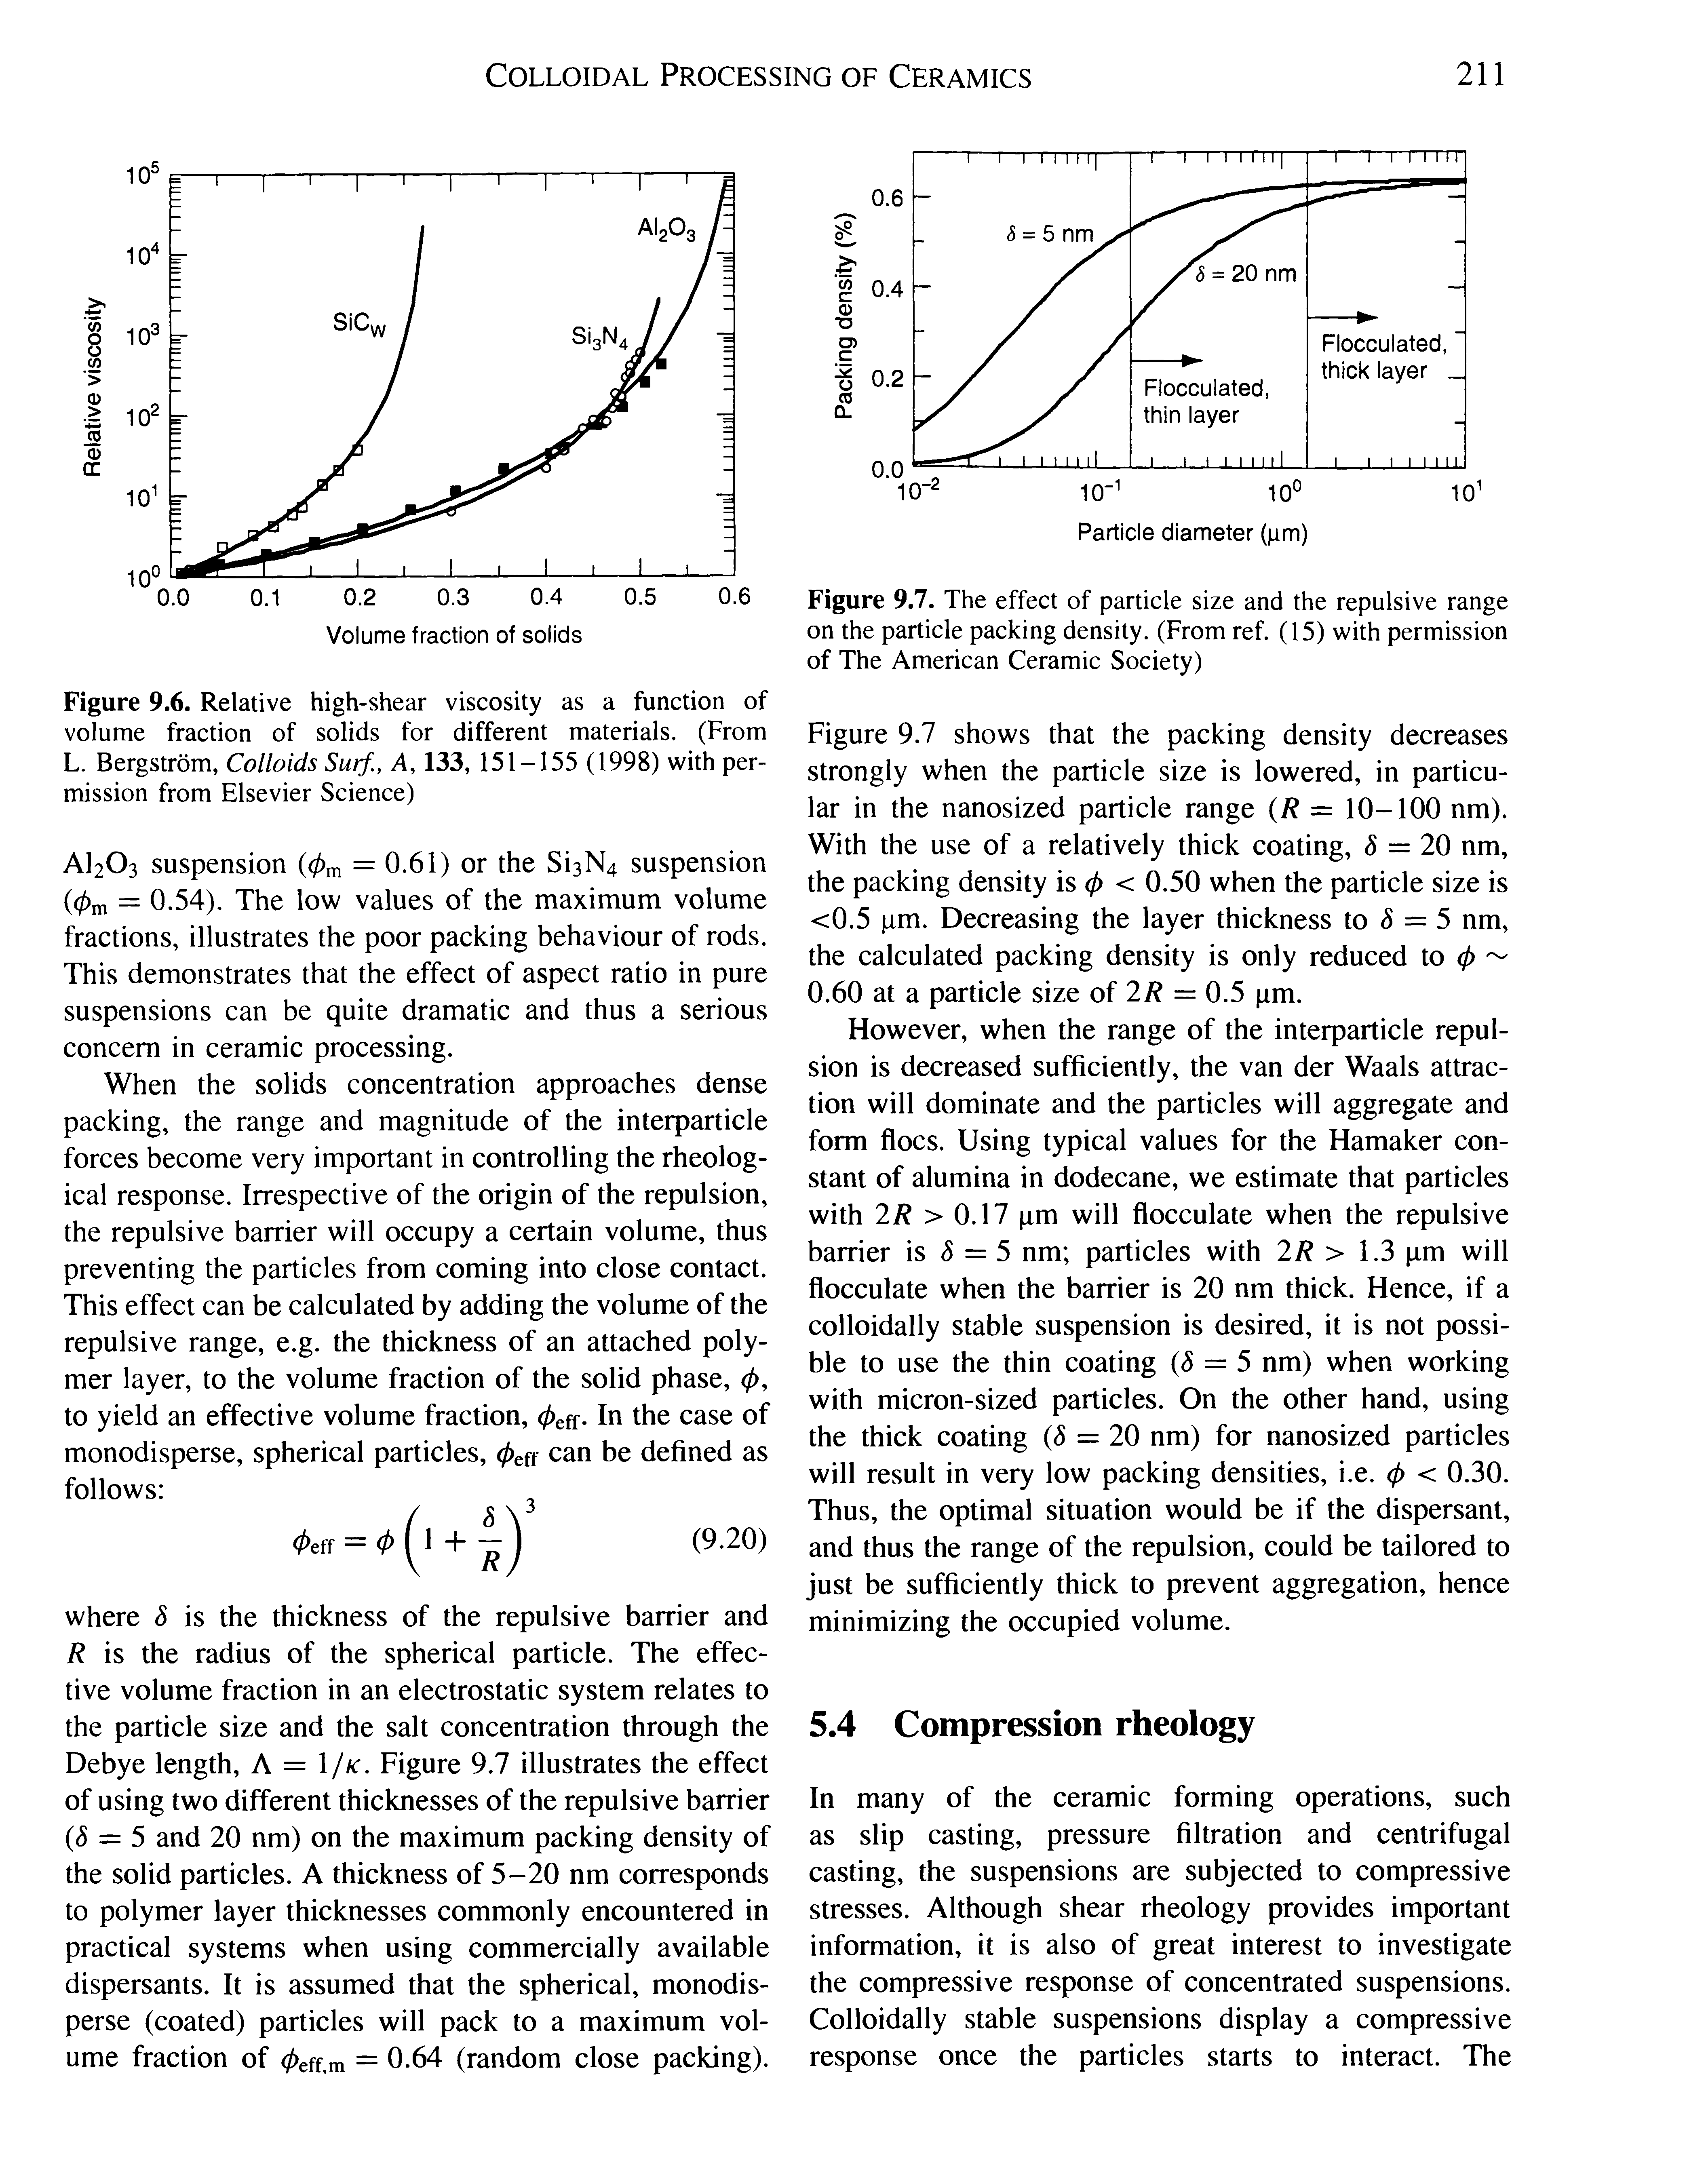 Figure 9.7. The effect of particle size and the repulsive range on the particle packing density. (From ref. (15) with permission of The American Ceramic Society)...